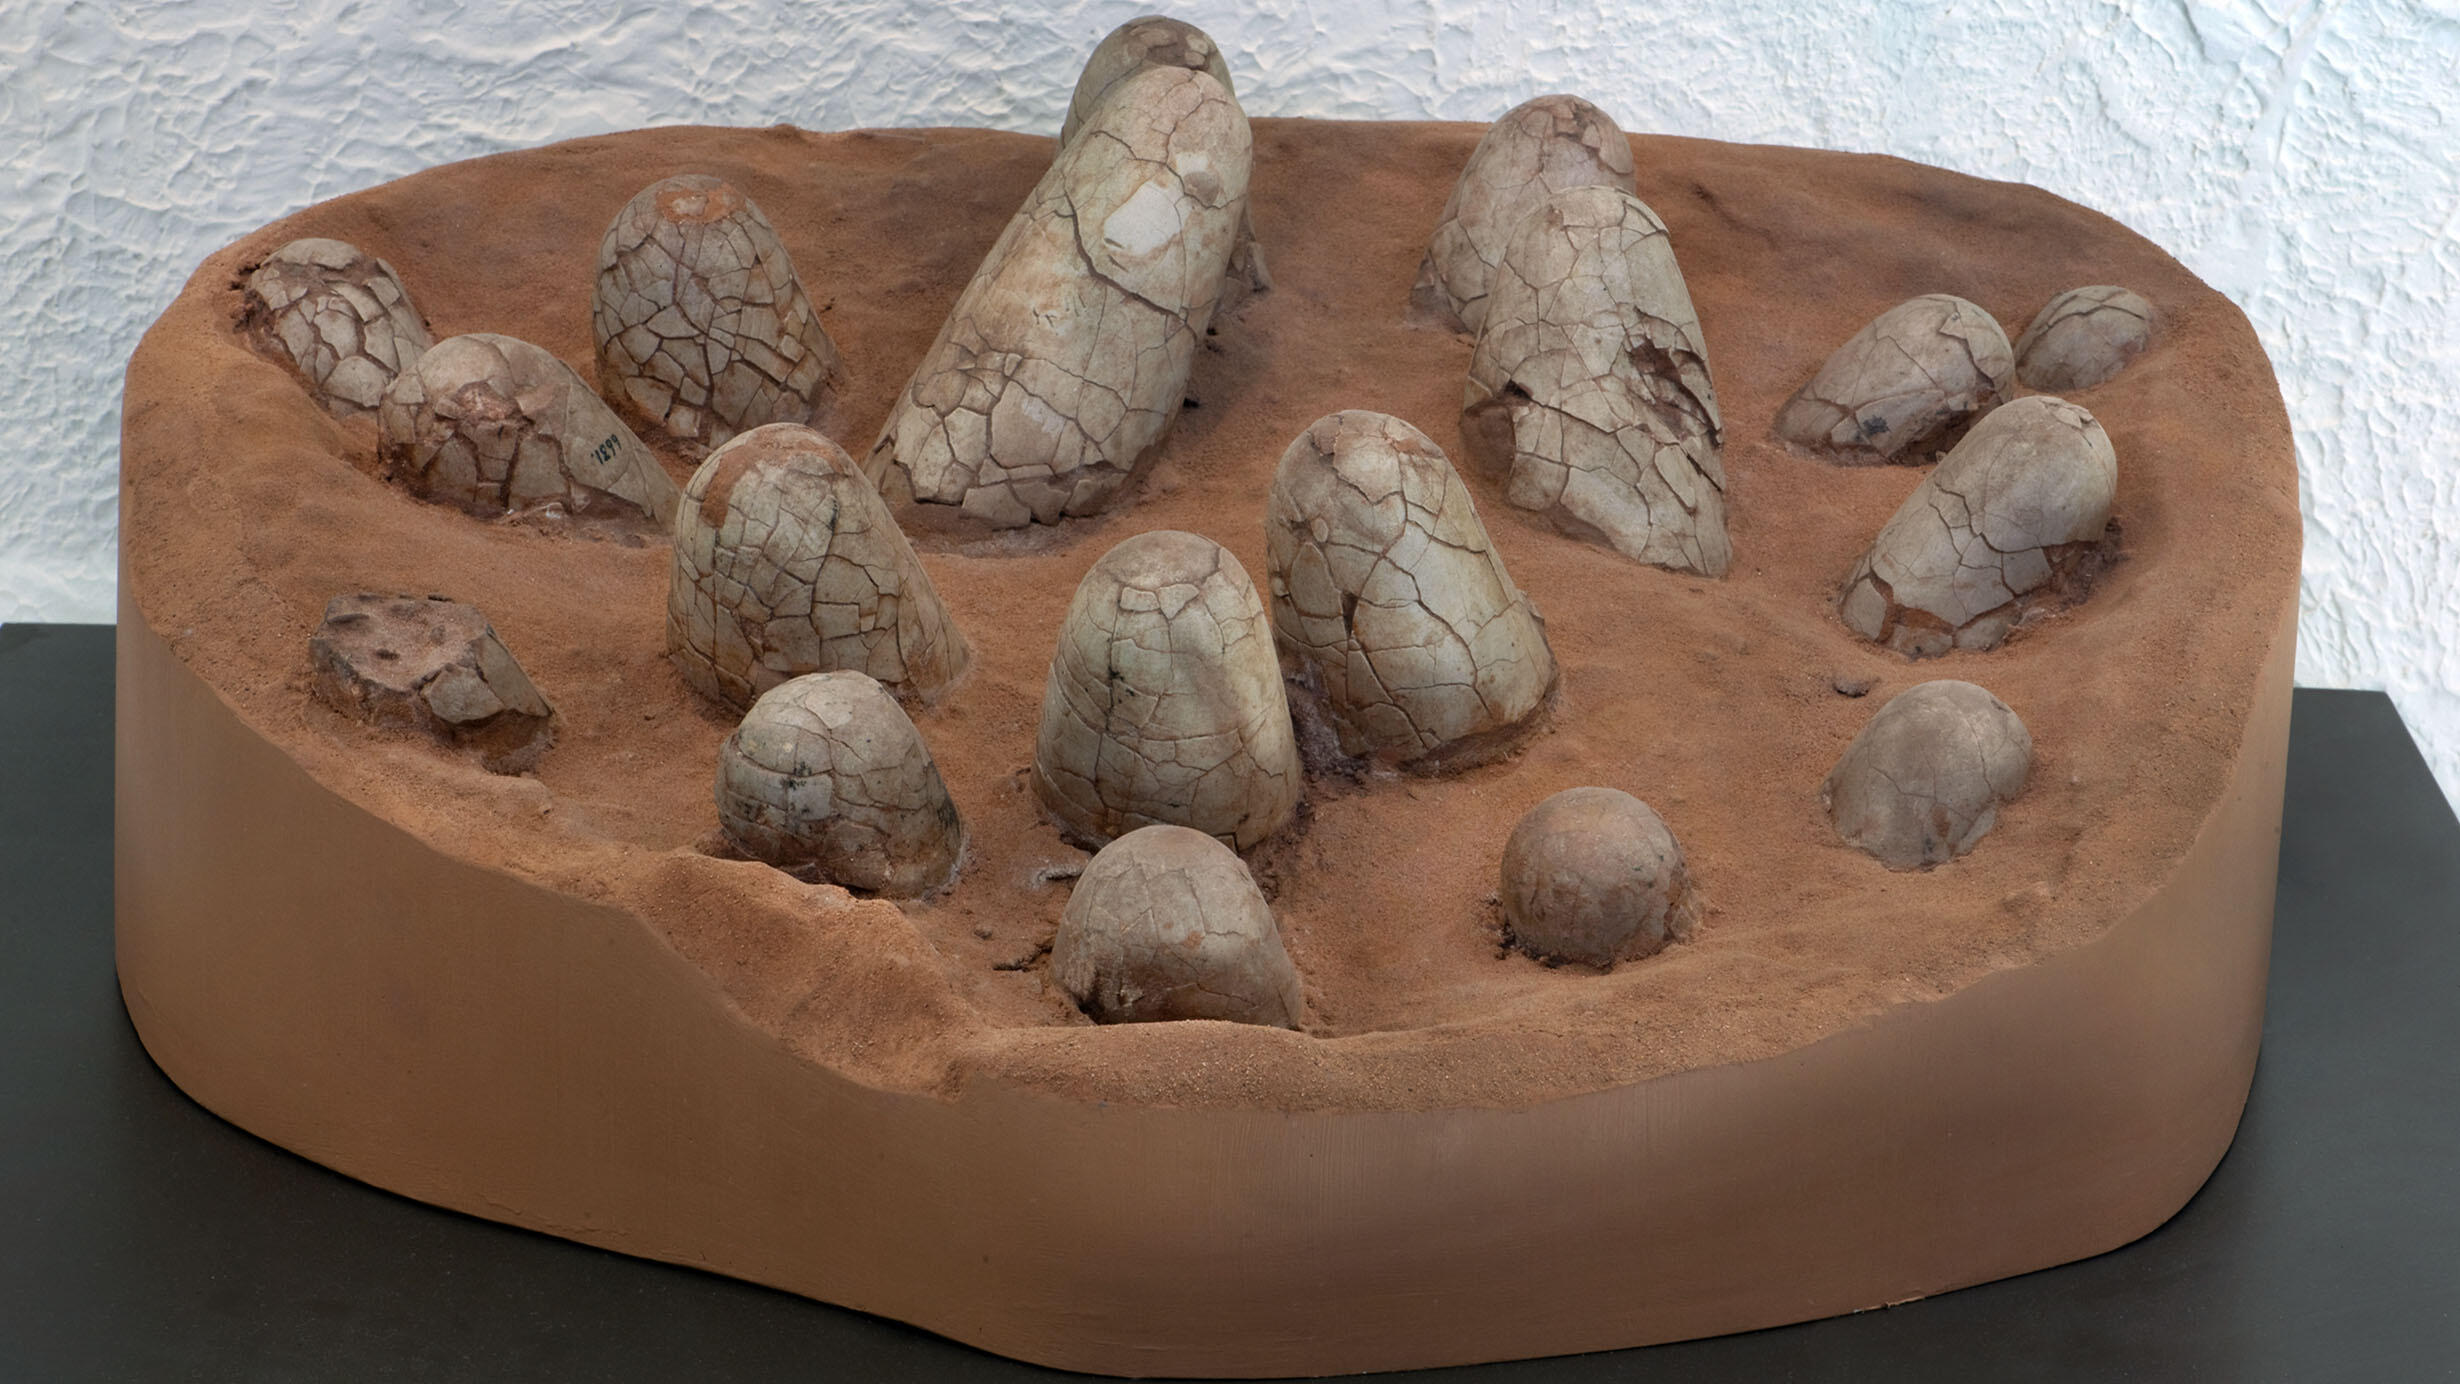 Fossil dinosaur eggs embedded in rock and partially exposed.